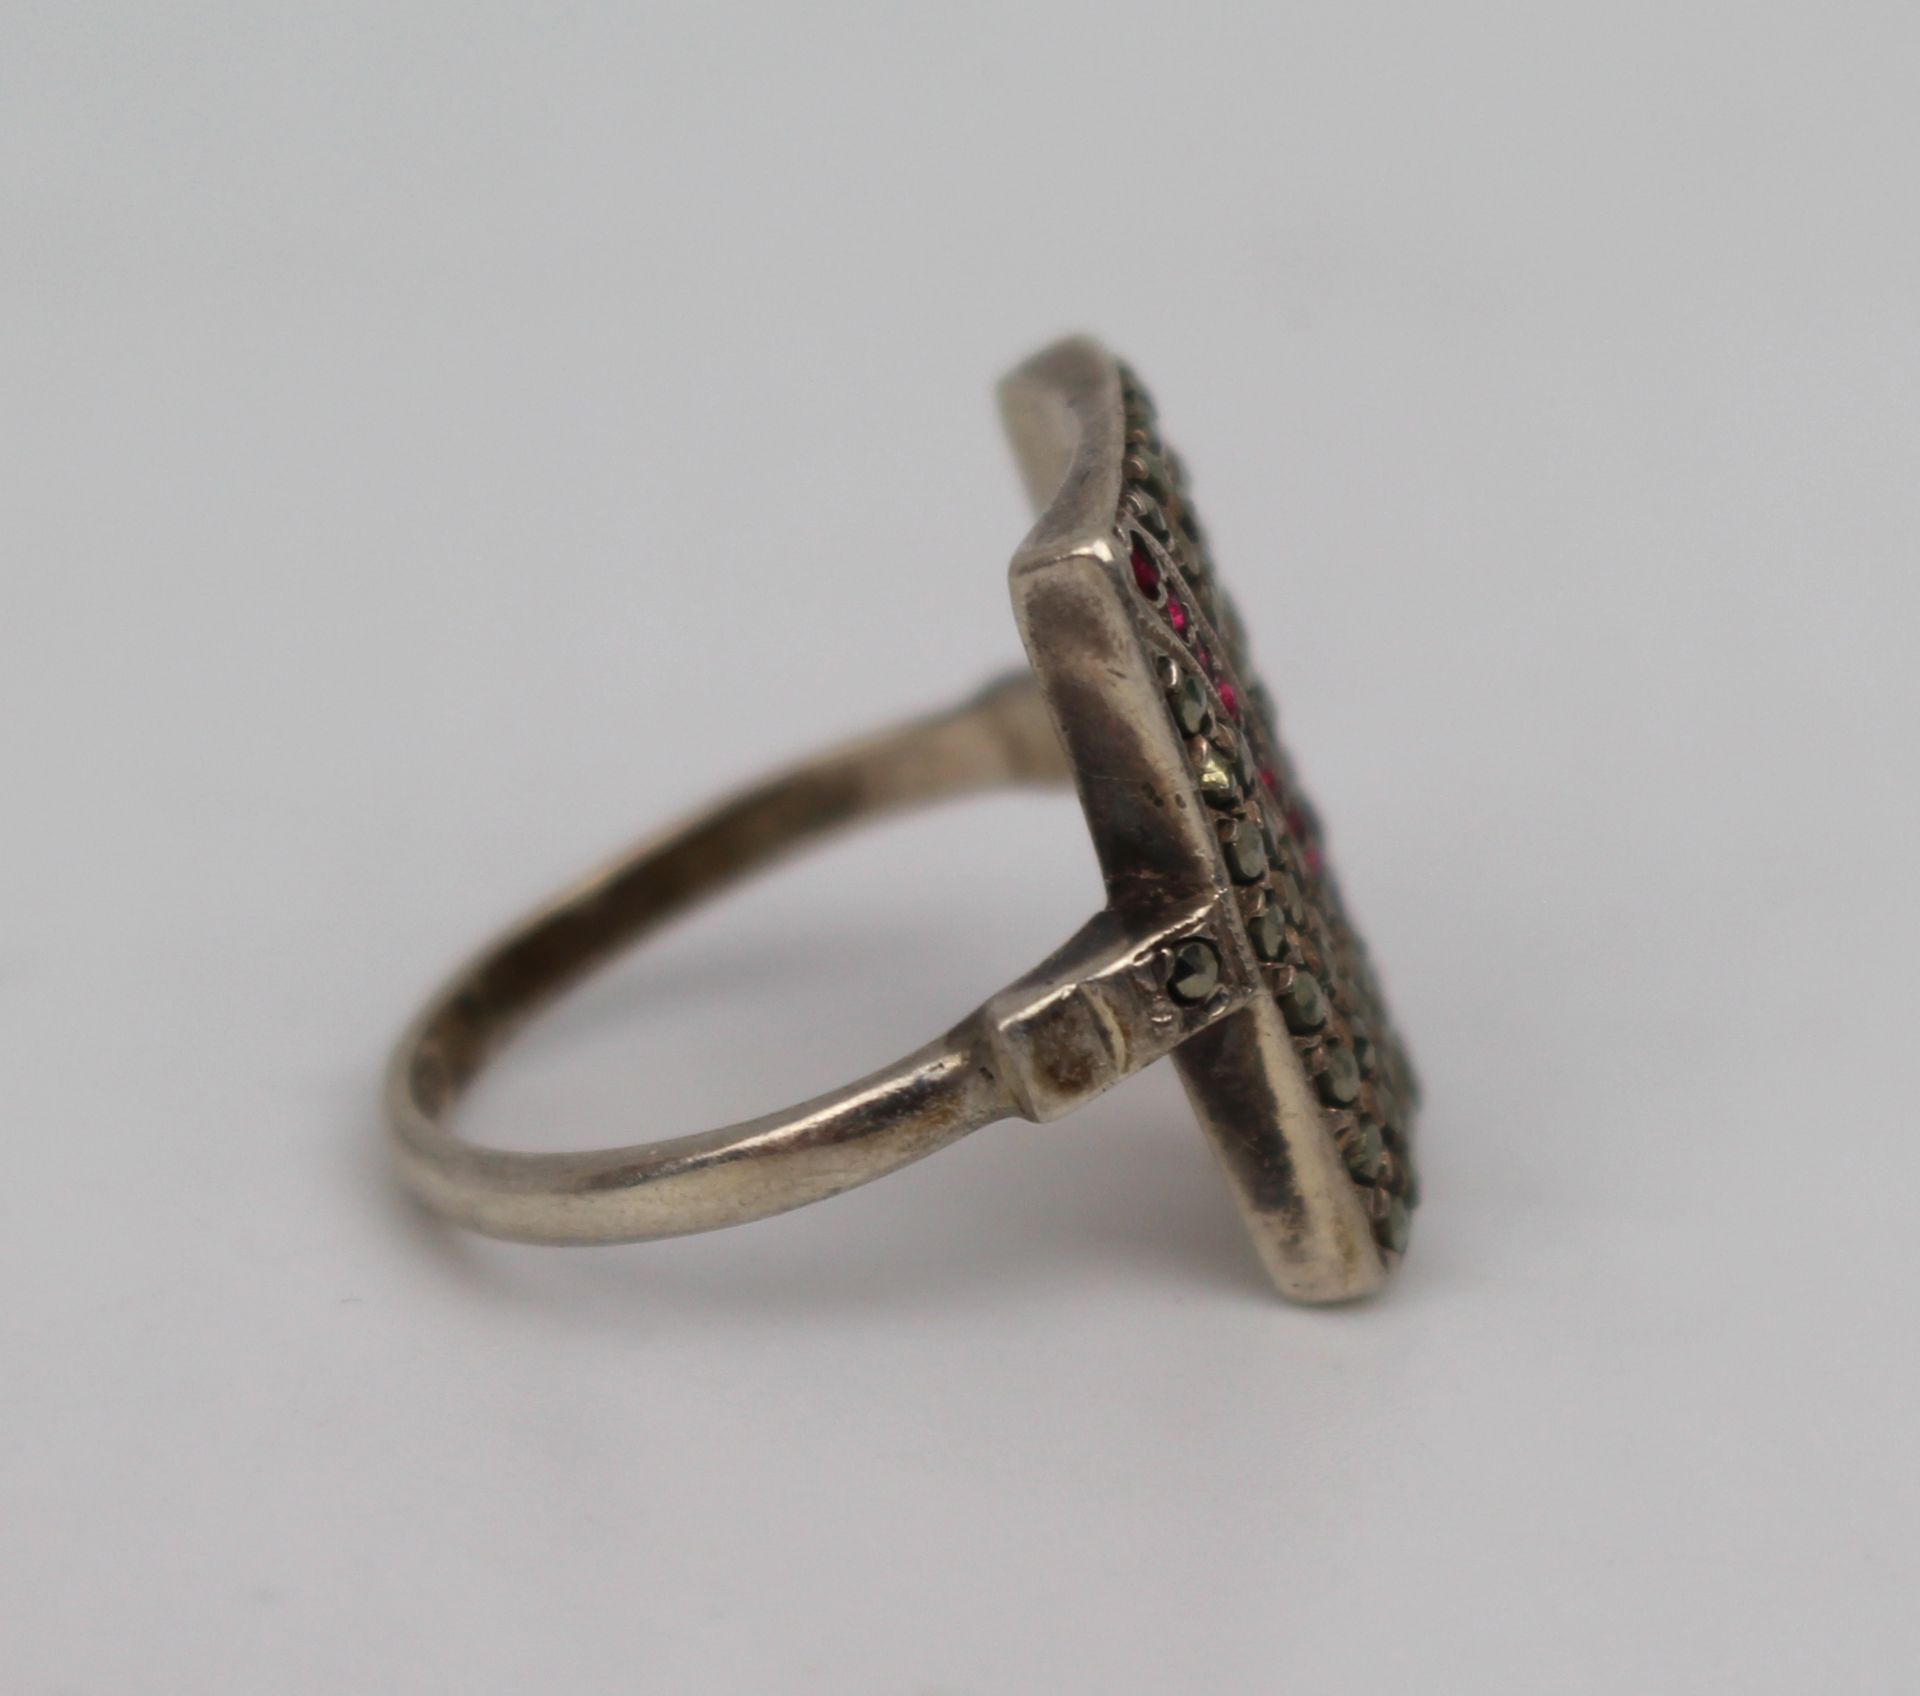 Vintage Silver Decorative Ring - Image 2 of 4